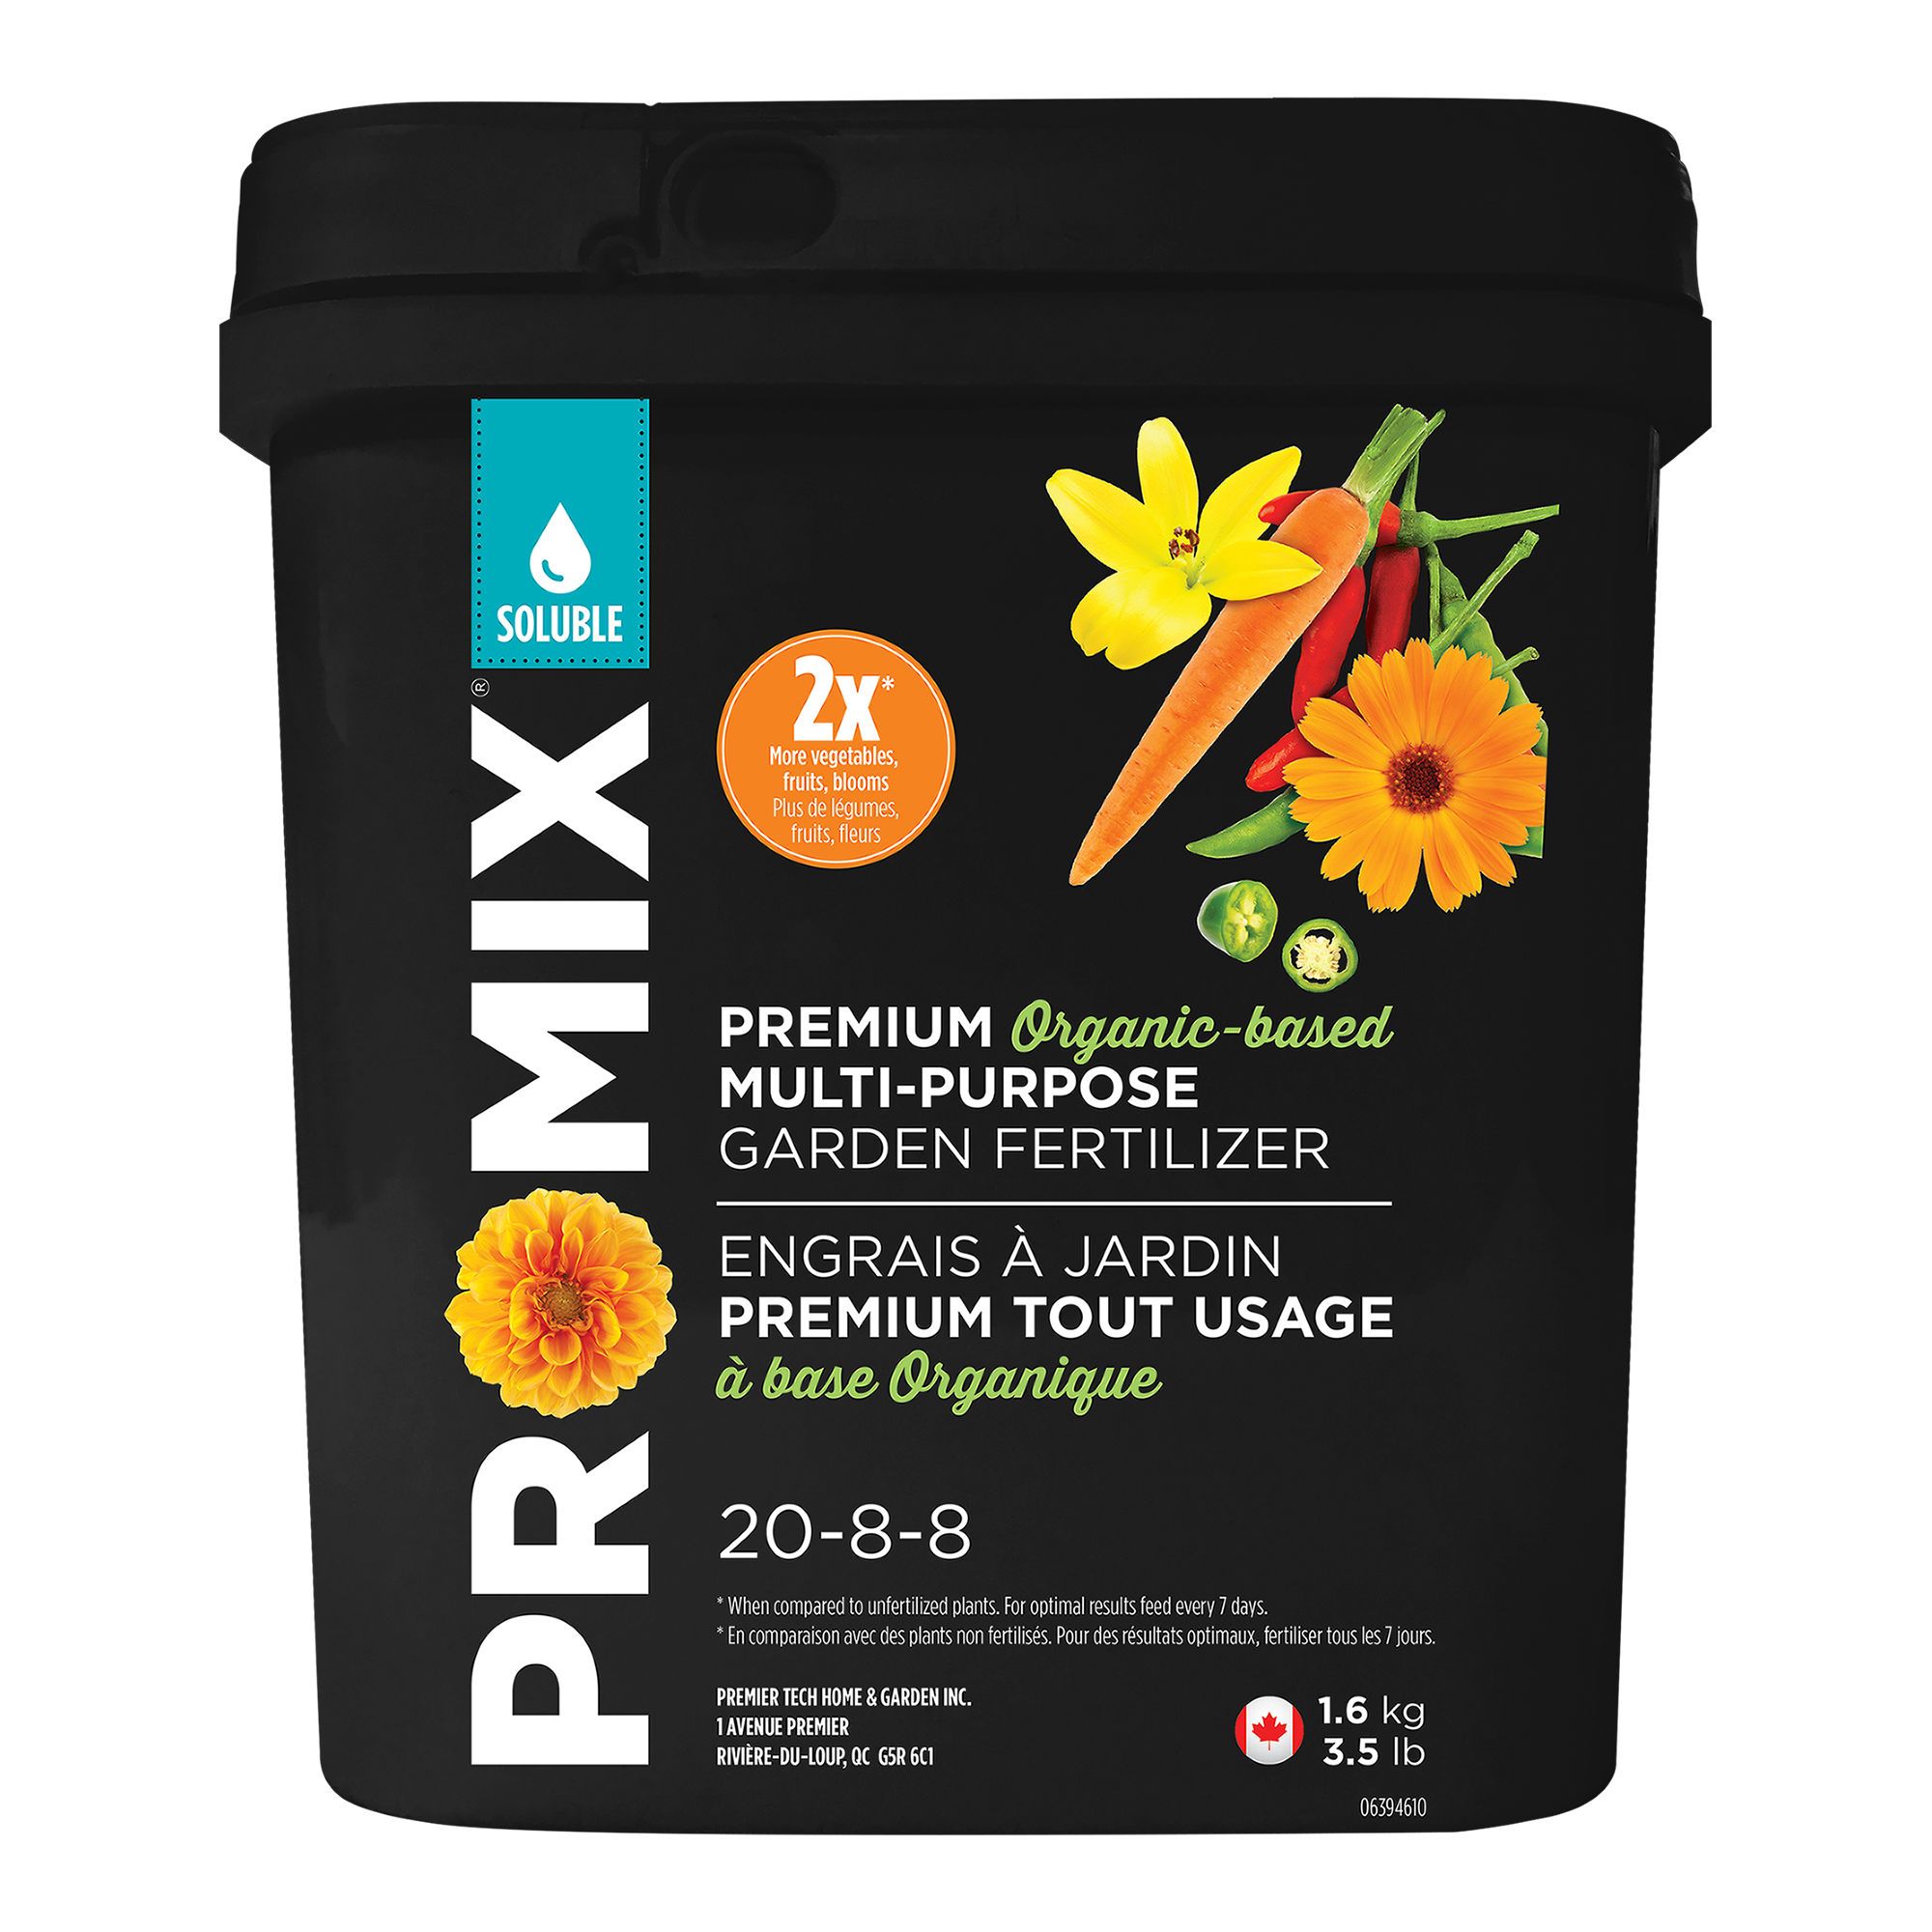 Soluble plant fertilizer 20-8-8 from PROMIX